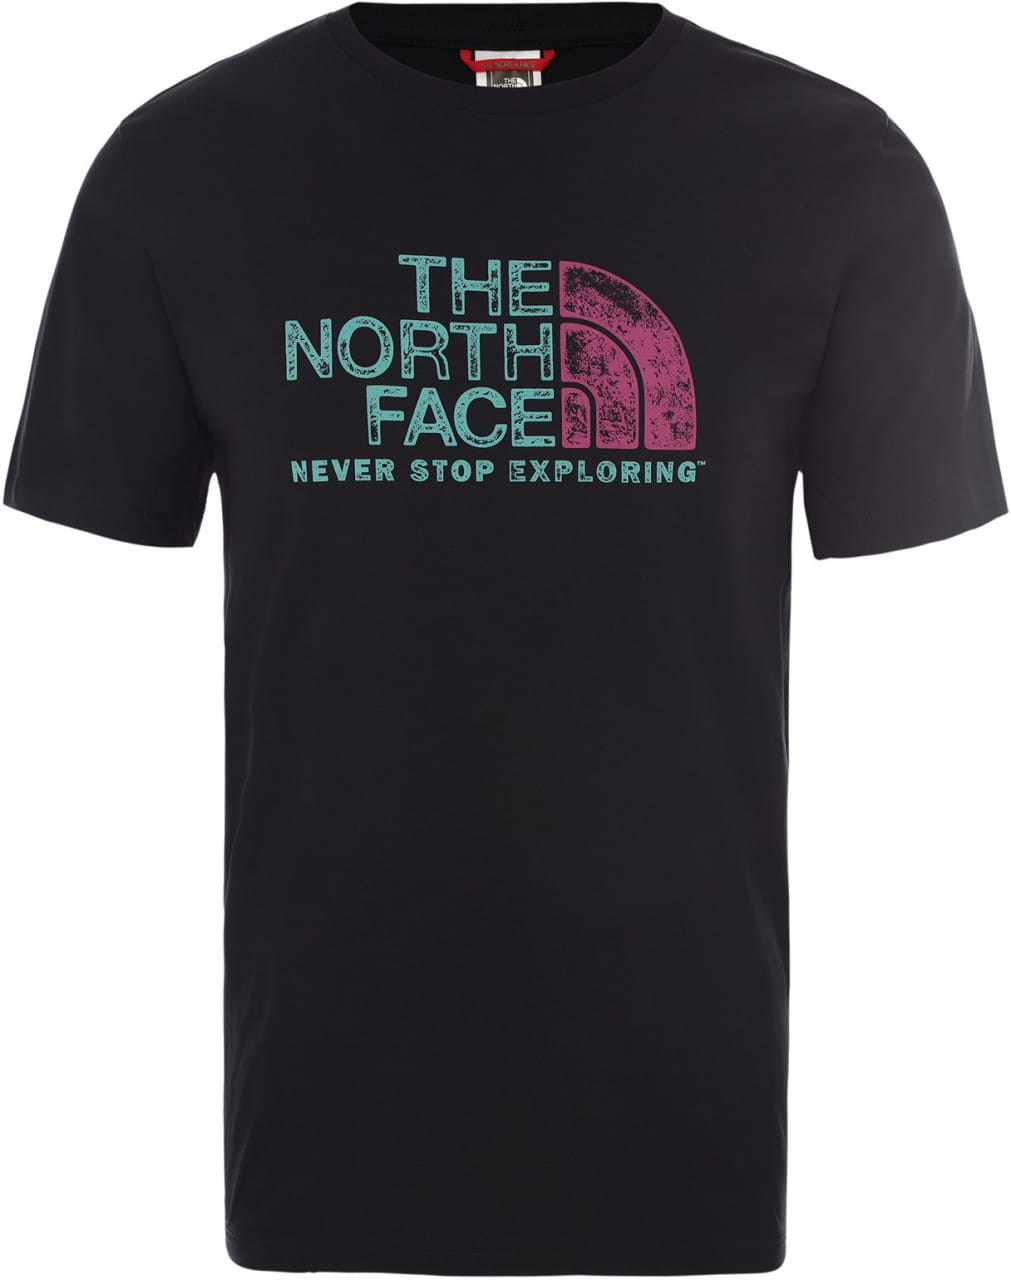 T-Shirts The North Face Men's Rust 2 T-Shirt